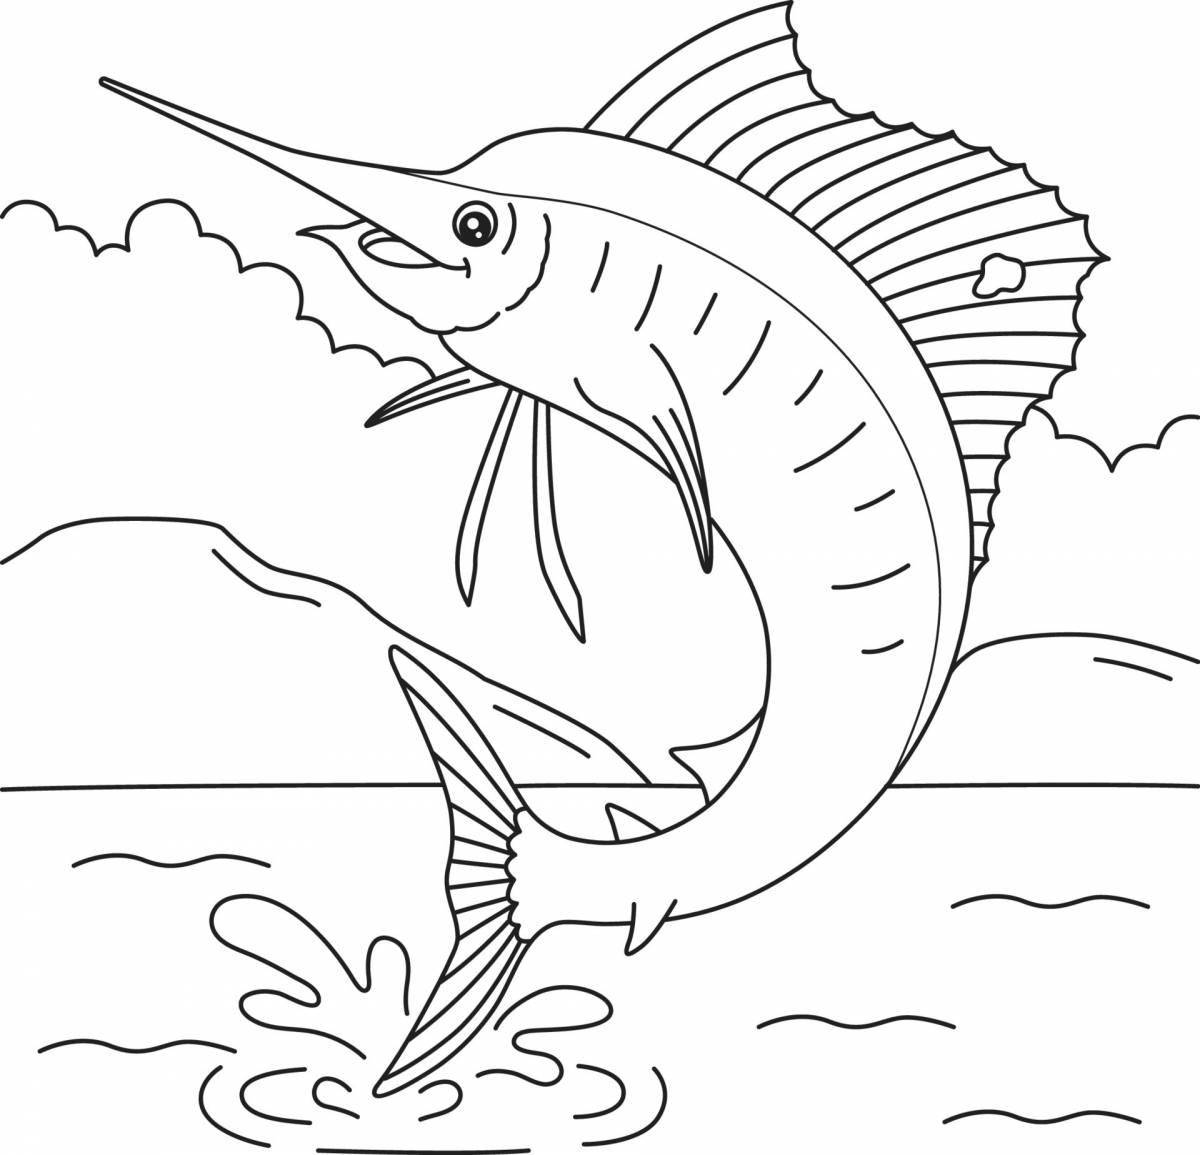 Adorable swordfish coloring book for kids